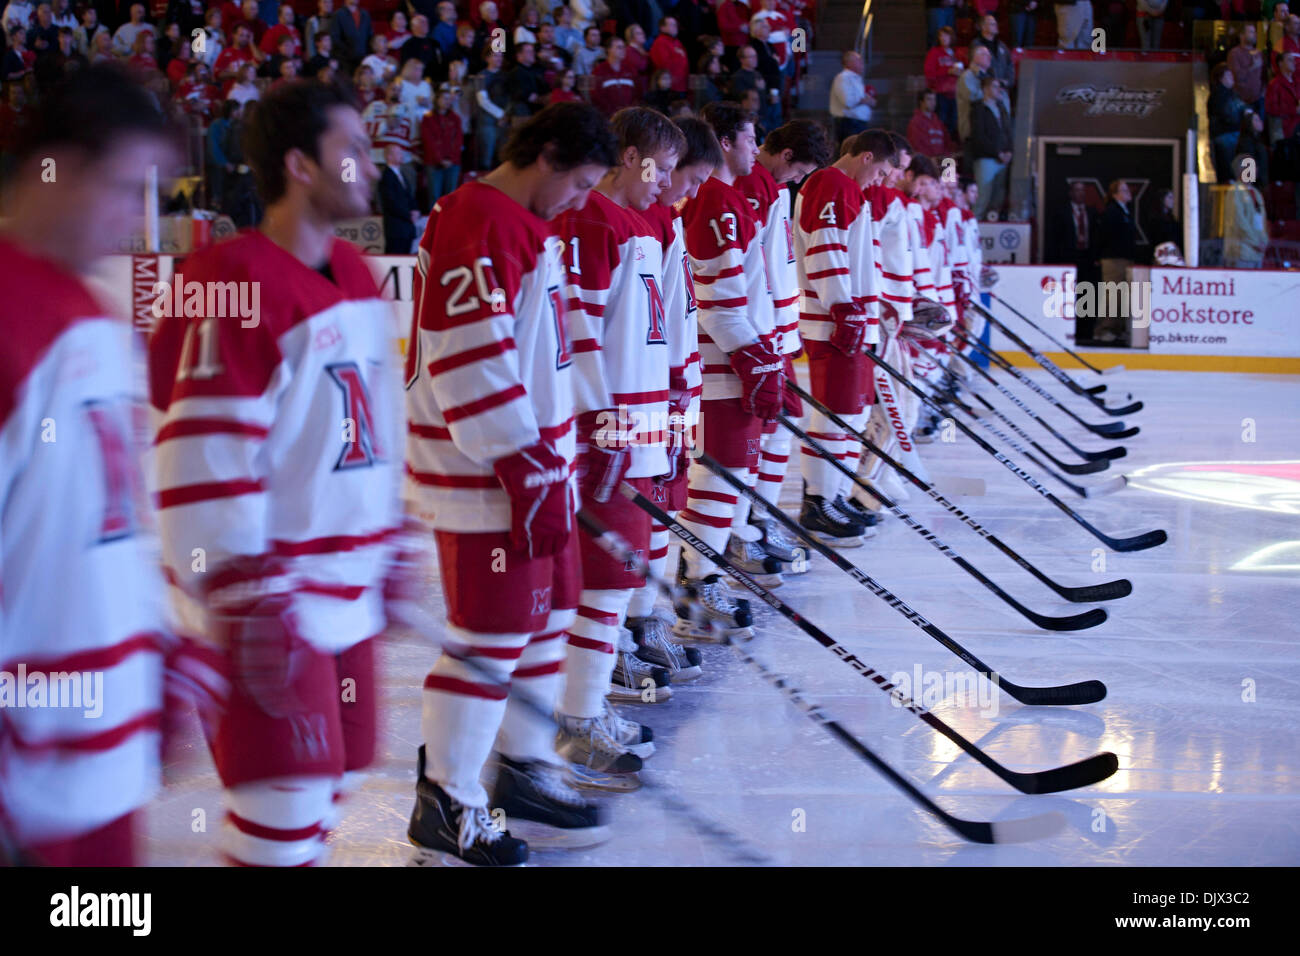 Oct. 23, 2010 - Oxford, Ohio, United States of America - The Miami (OH) University's Hockey Team line up during the National Anthem before the first period of play against Northern Michigan University at Miami University's Steve Cady Arena at the Goggin Ice Center in Oxford, Ohio Saturday evening October 23, 2010. The Miami University Redhawks beat the Northern Michigan University  Stock Photo